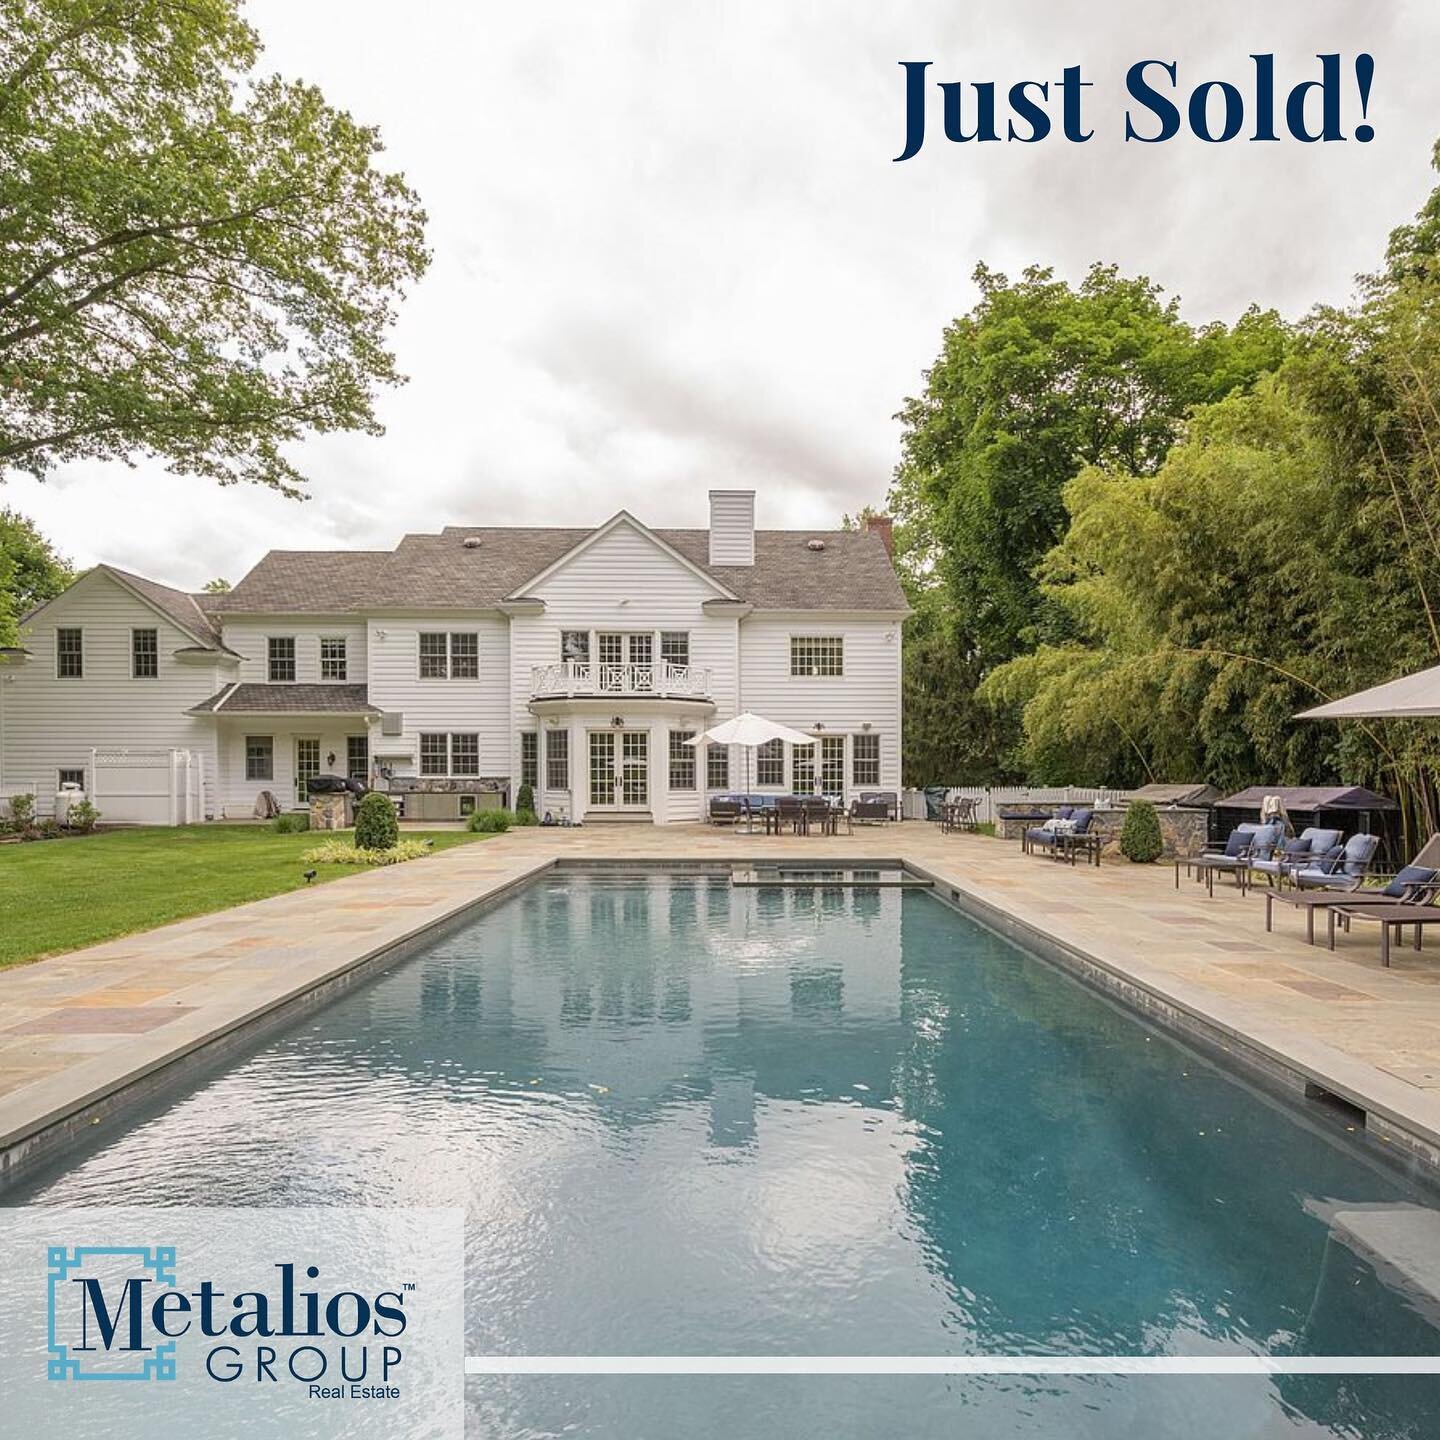 JUST SOLD! 1363 King St 🥂 Congratulations to our sellers, thrilled @joykimmetalios was able to help you with the sale of your gorgeous home! 

#justsold #greenwich #realtor #houlihanlawrence